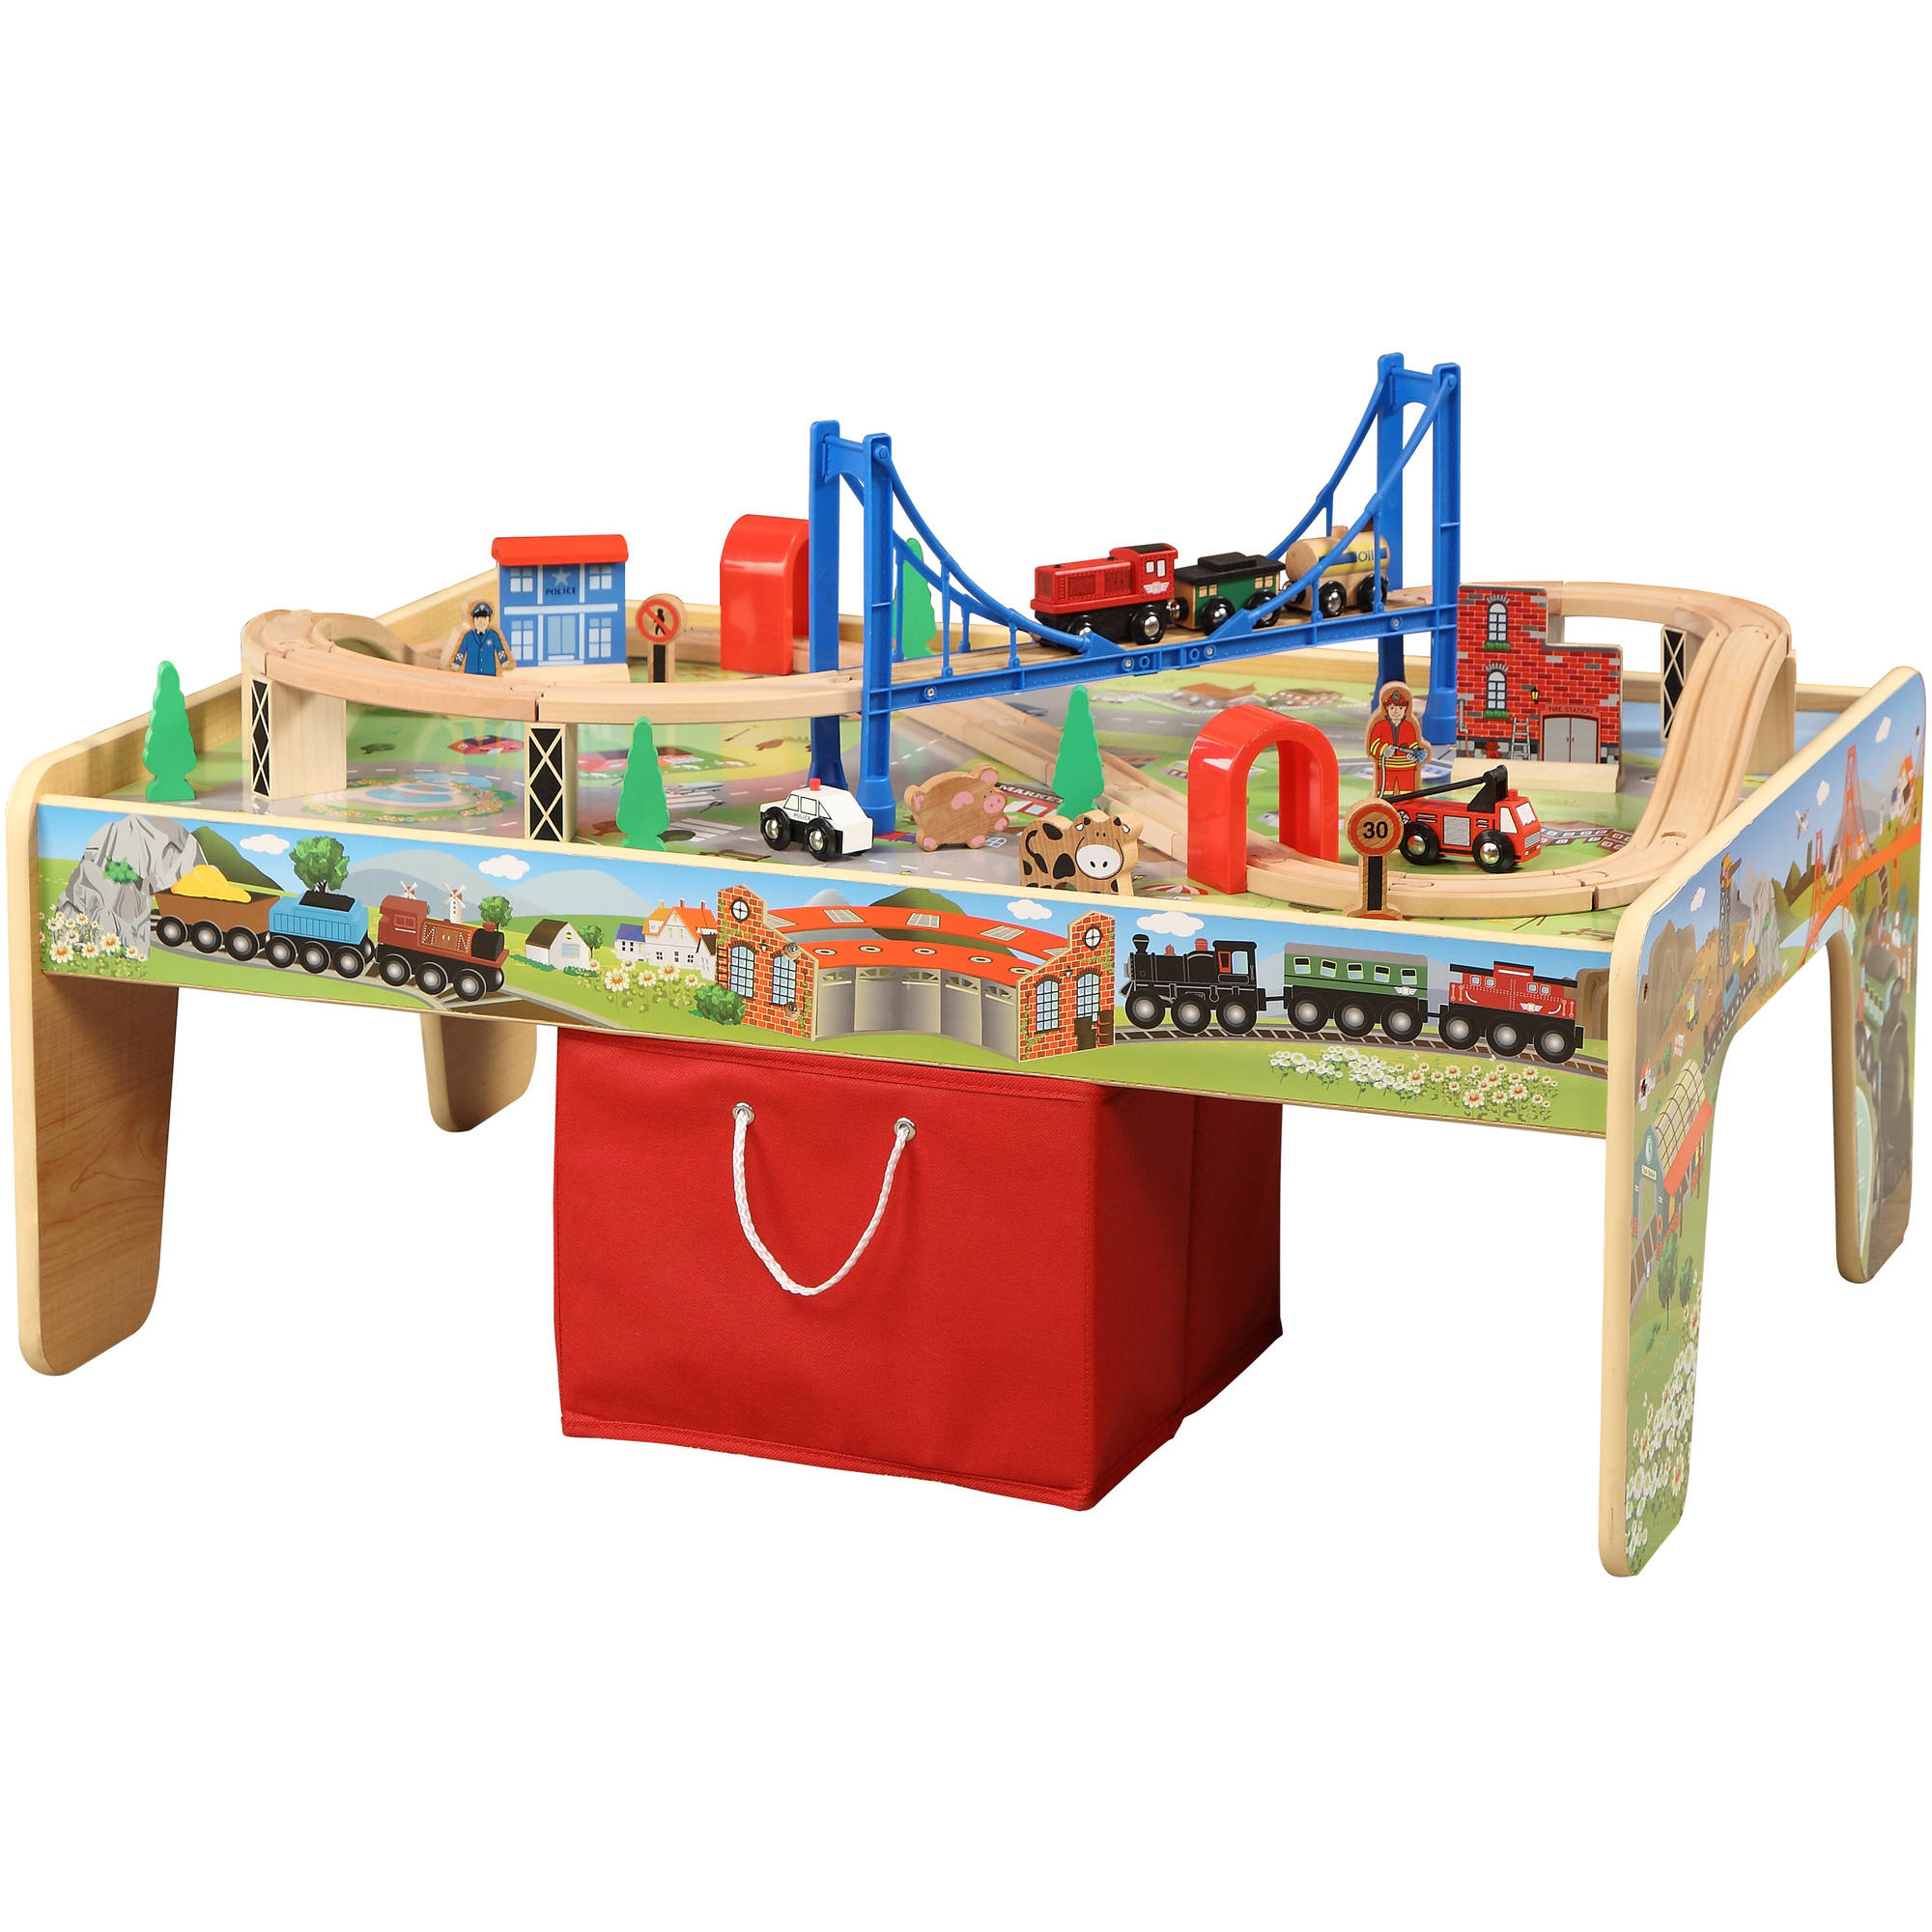 Maxim Train Activity Table (50 Pieces) Toy Trains - image 1 of 3